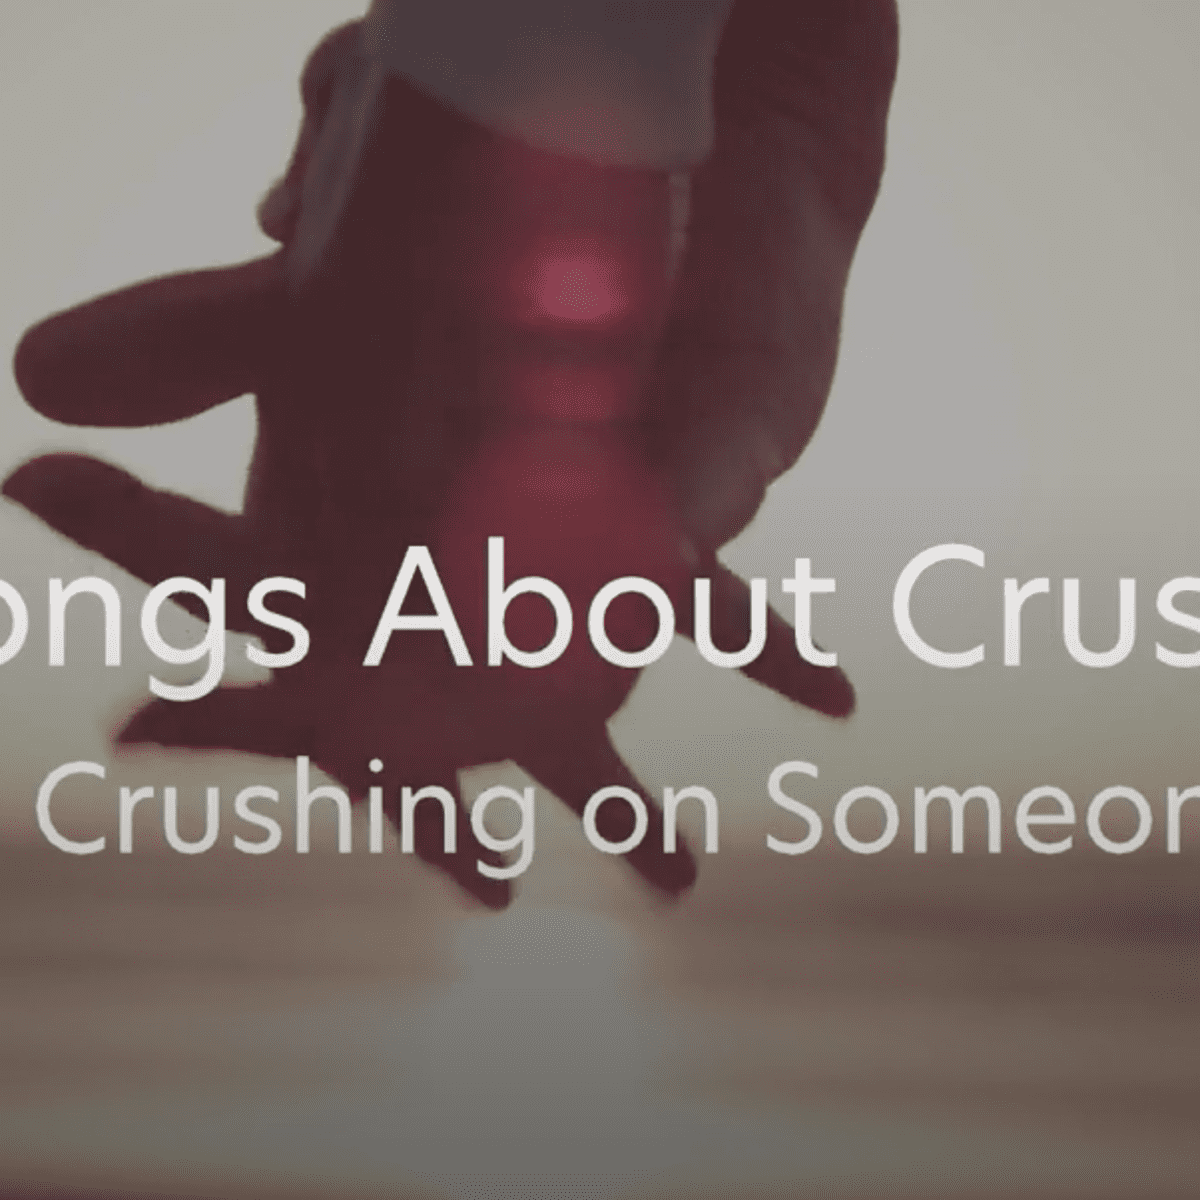 127 Songs About Crushes And Crushing On Someone Spinditty